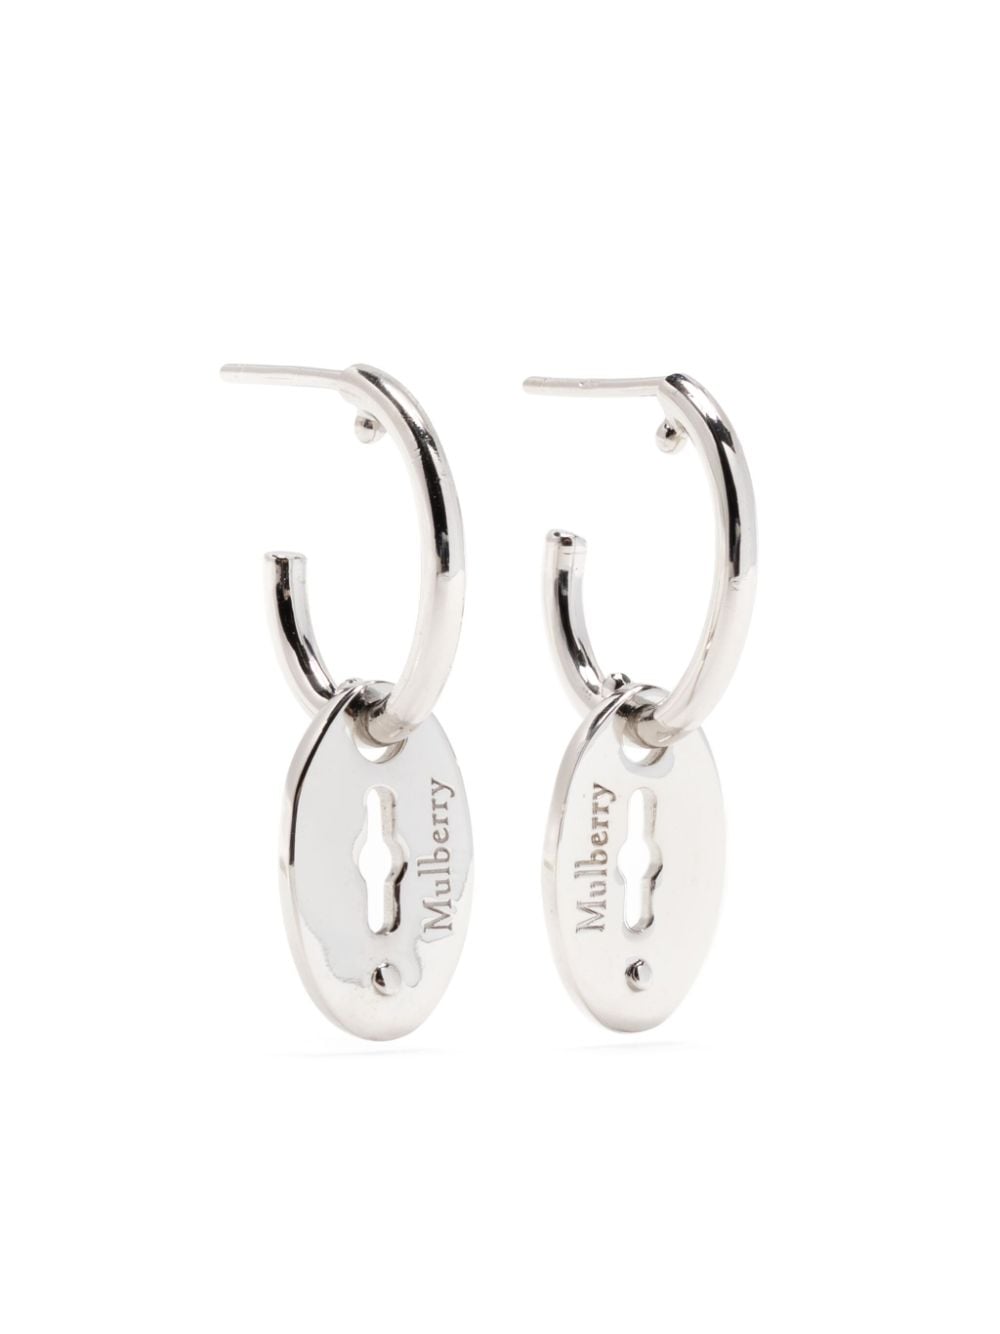 Mulberry Bayswater hoop earrings - Silver von Mulberry